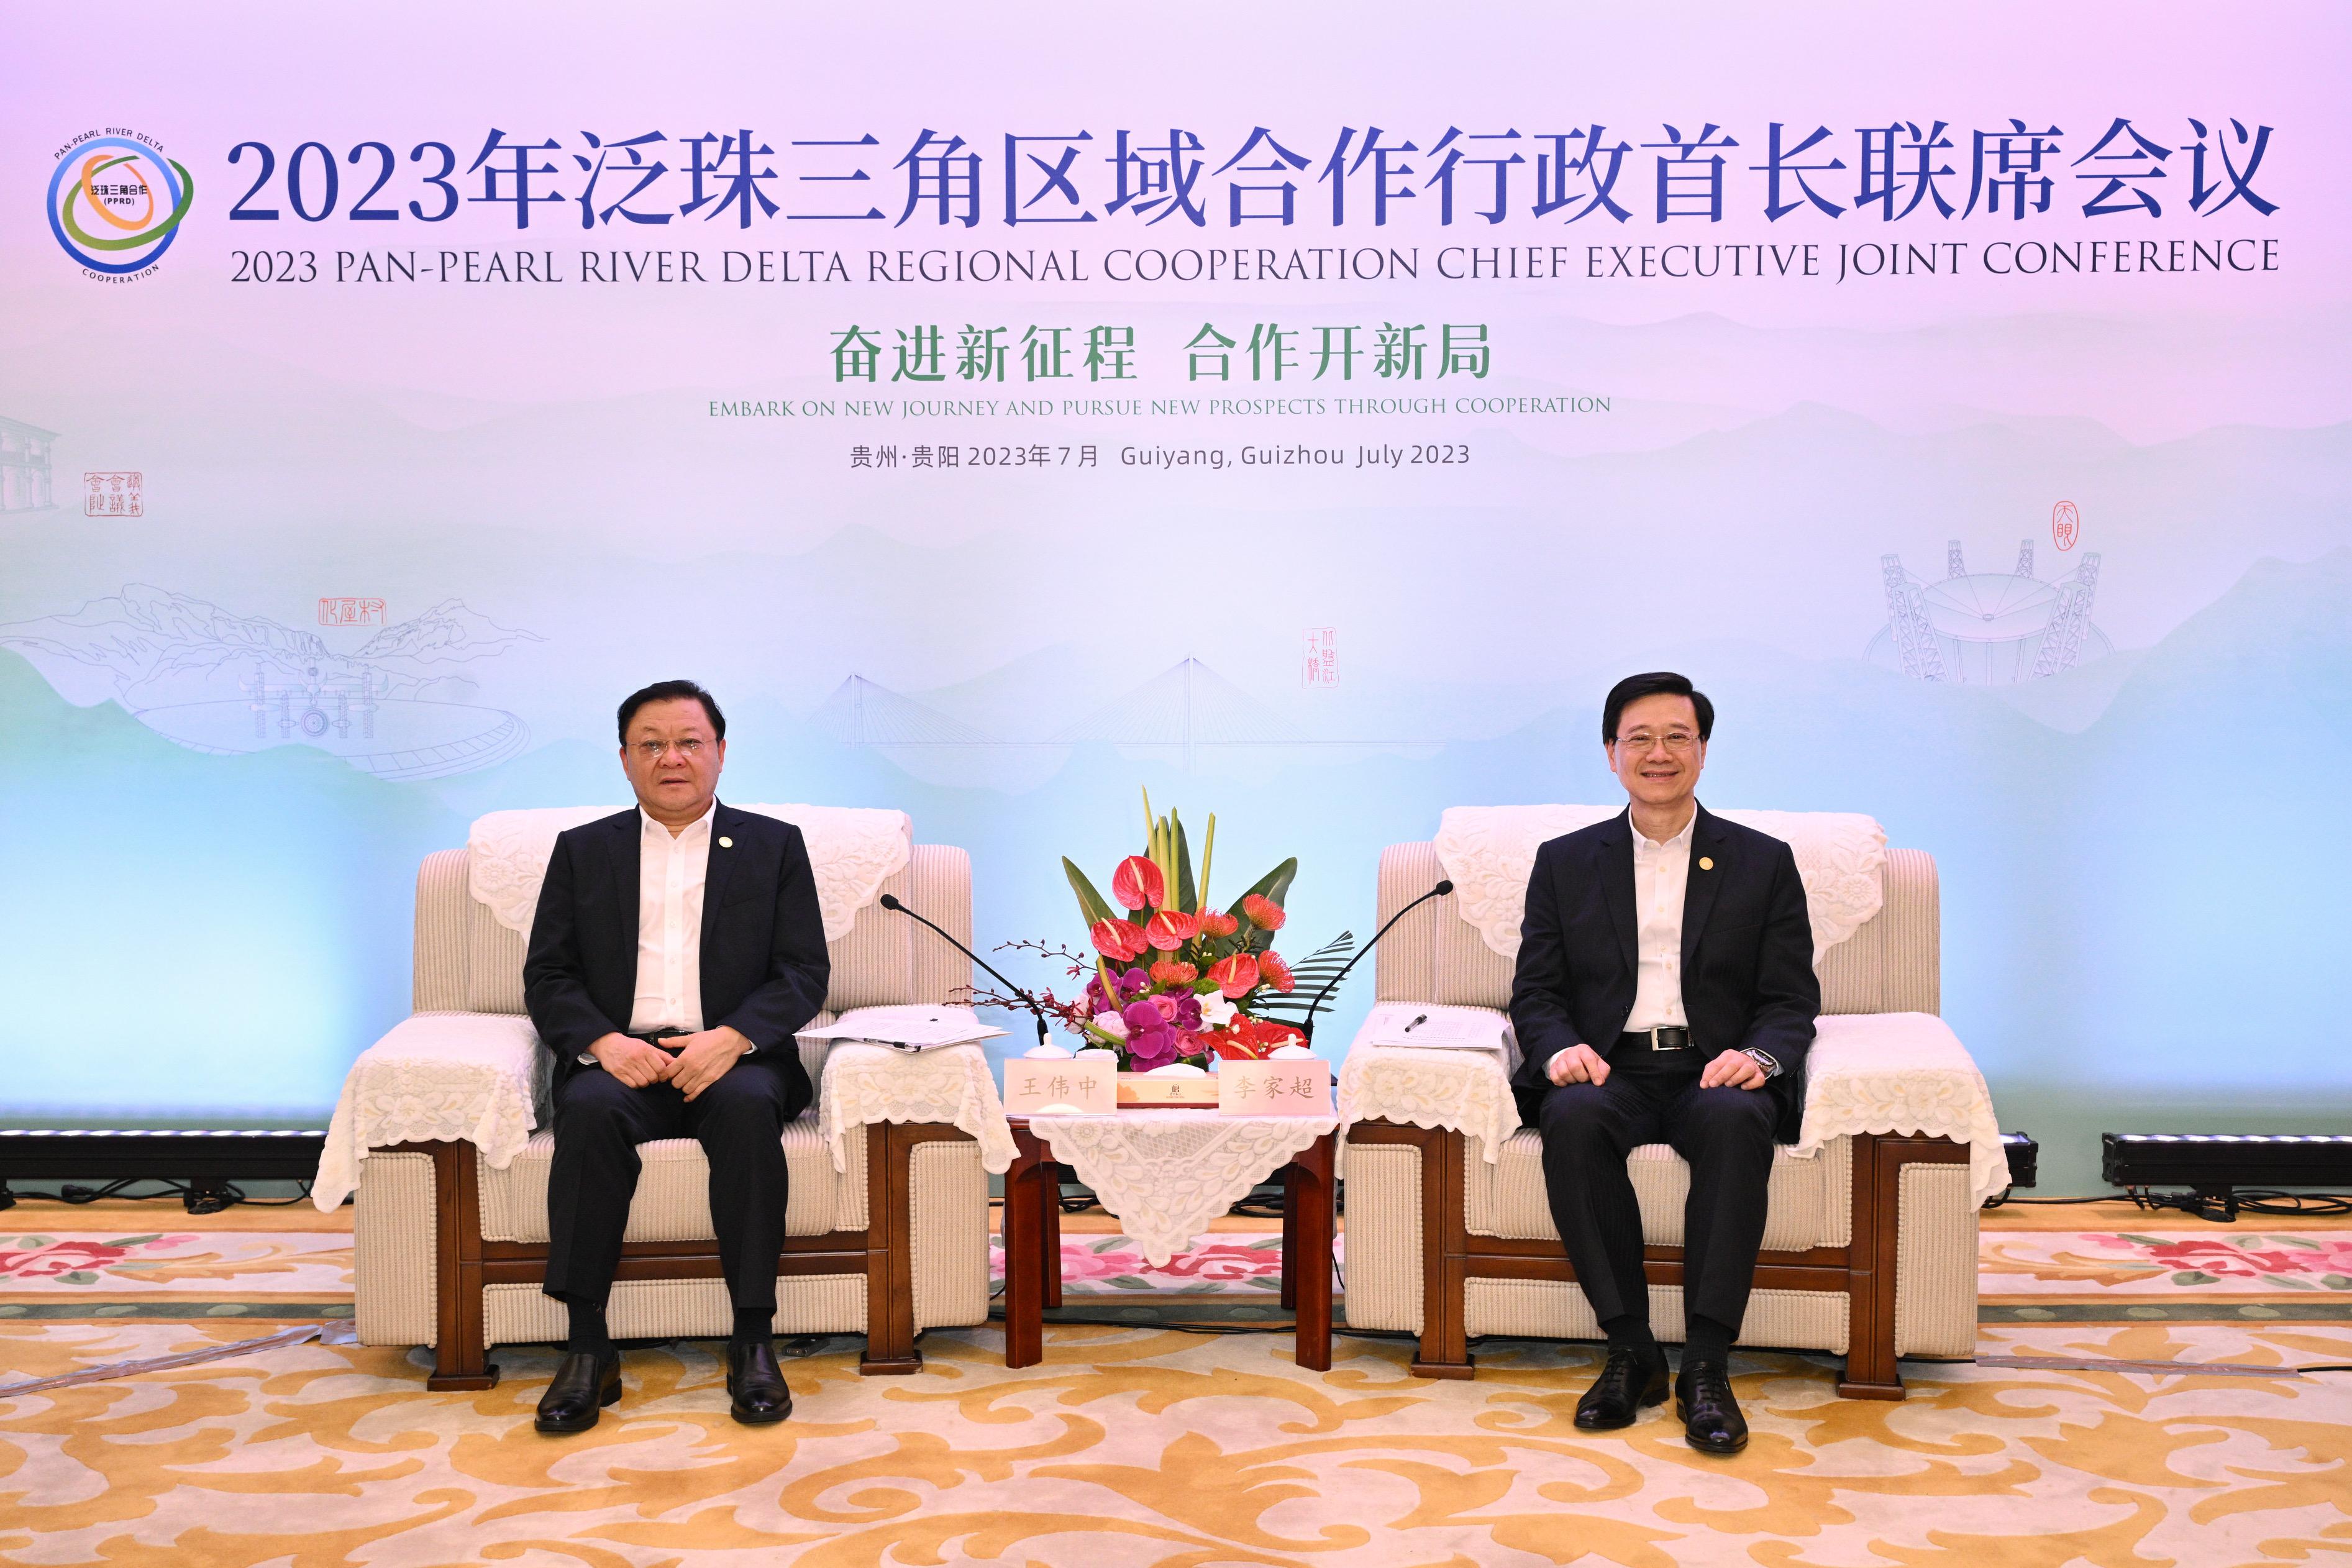 The Chief Executive, Mr John Lee, led a delegation to visit Guiyang today (July 7). Photo shows Mr Lee (right) and the Governor of Guangdong Province, Mr Wang Weizhong (left), at a bilateral meeting in Guiyang.